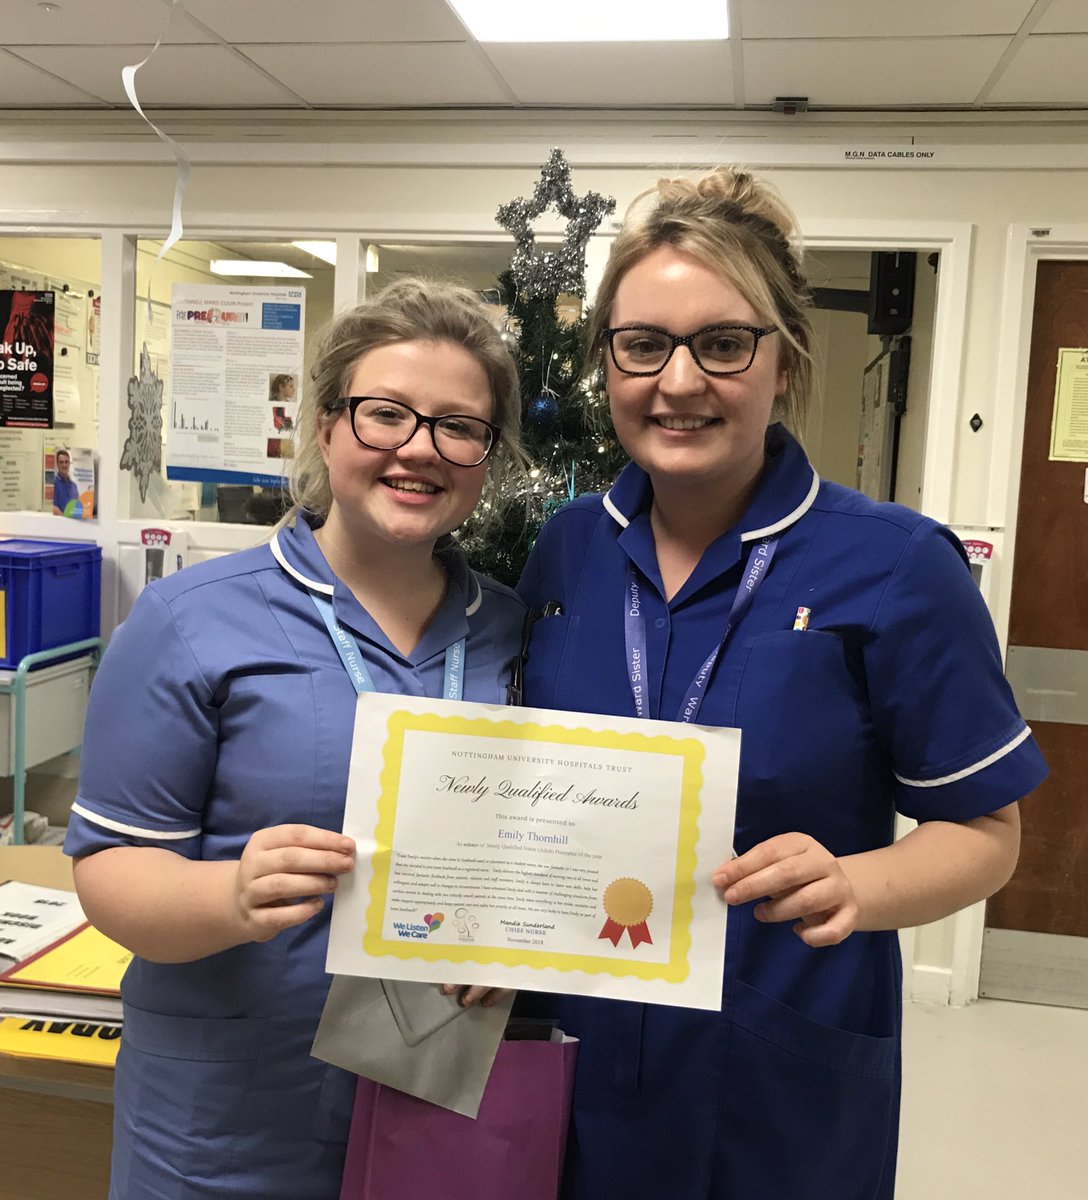 Our Preceptee of the Year winner, Emily Thornhill from #TeamSouthwell receiving her award from the @NewlyForum 👏🏼 Well done and keep up the good work 😁 @_marshallleanne @NUHMedicine @TeamNUH @suehaines1 @drjoanne_cooper @SharedGovNUH  @ChiefNurseNUH